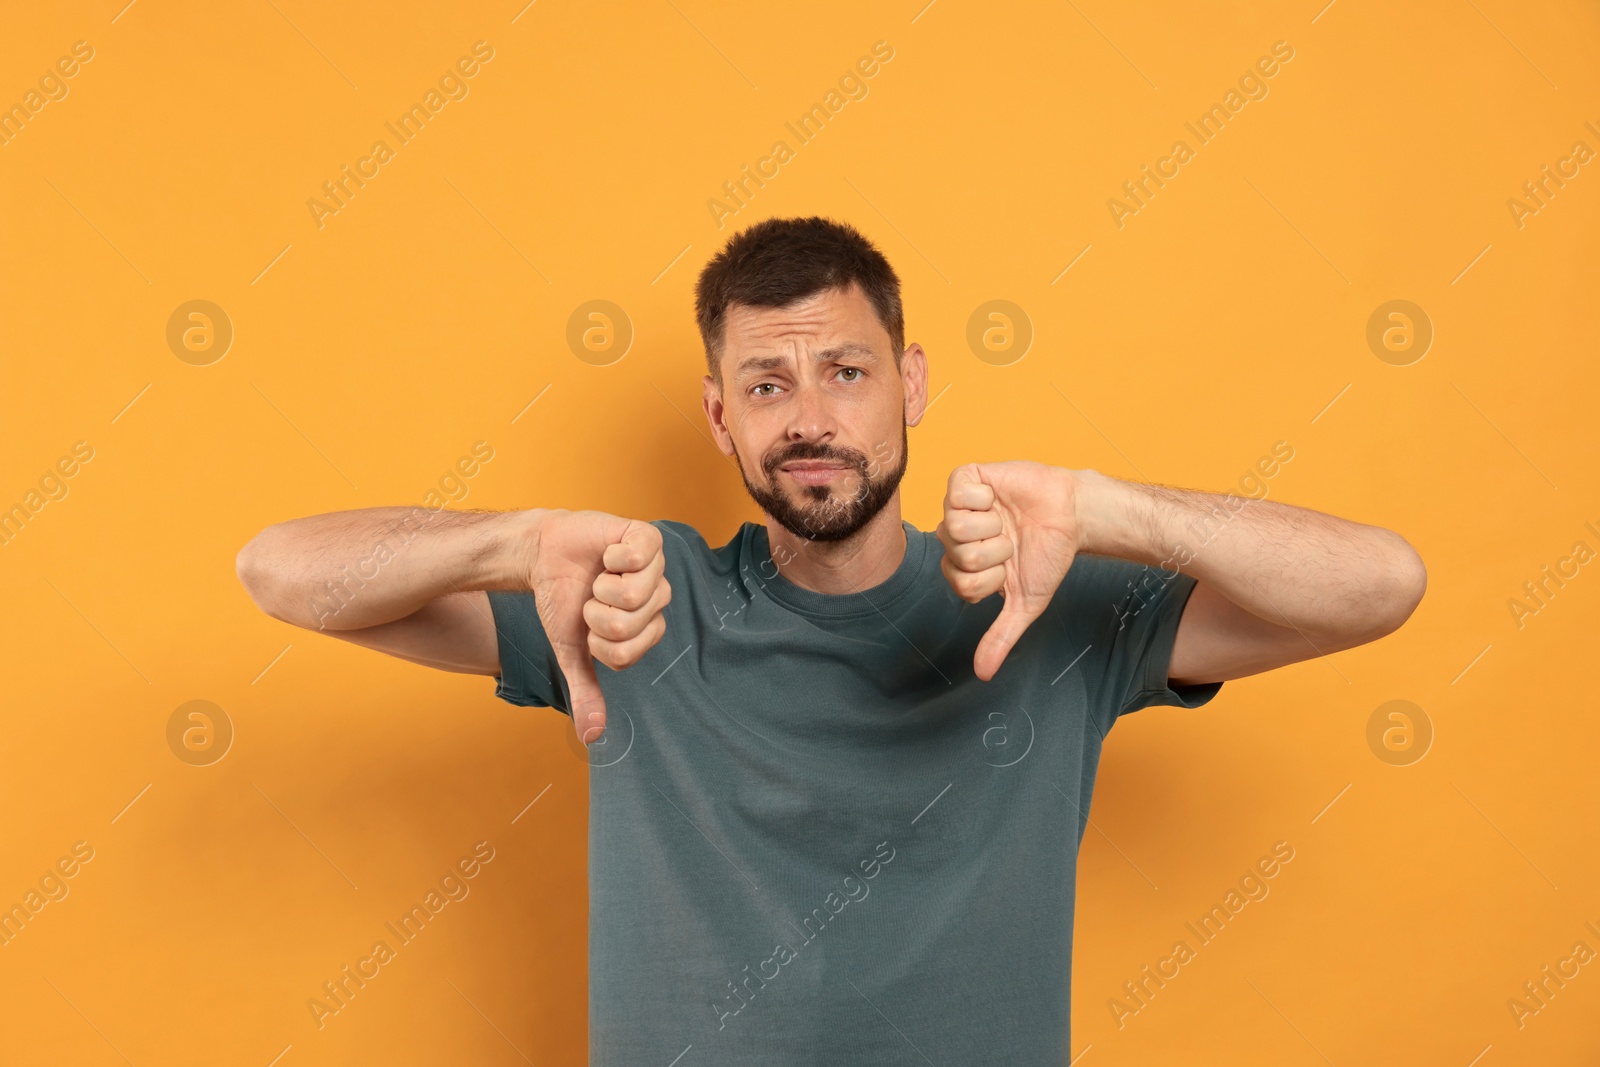 Photo of Man showing thumbs down on orange background